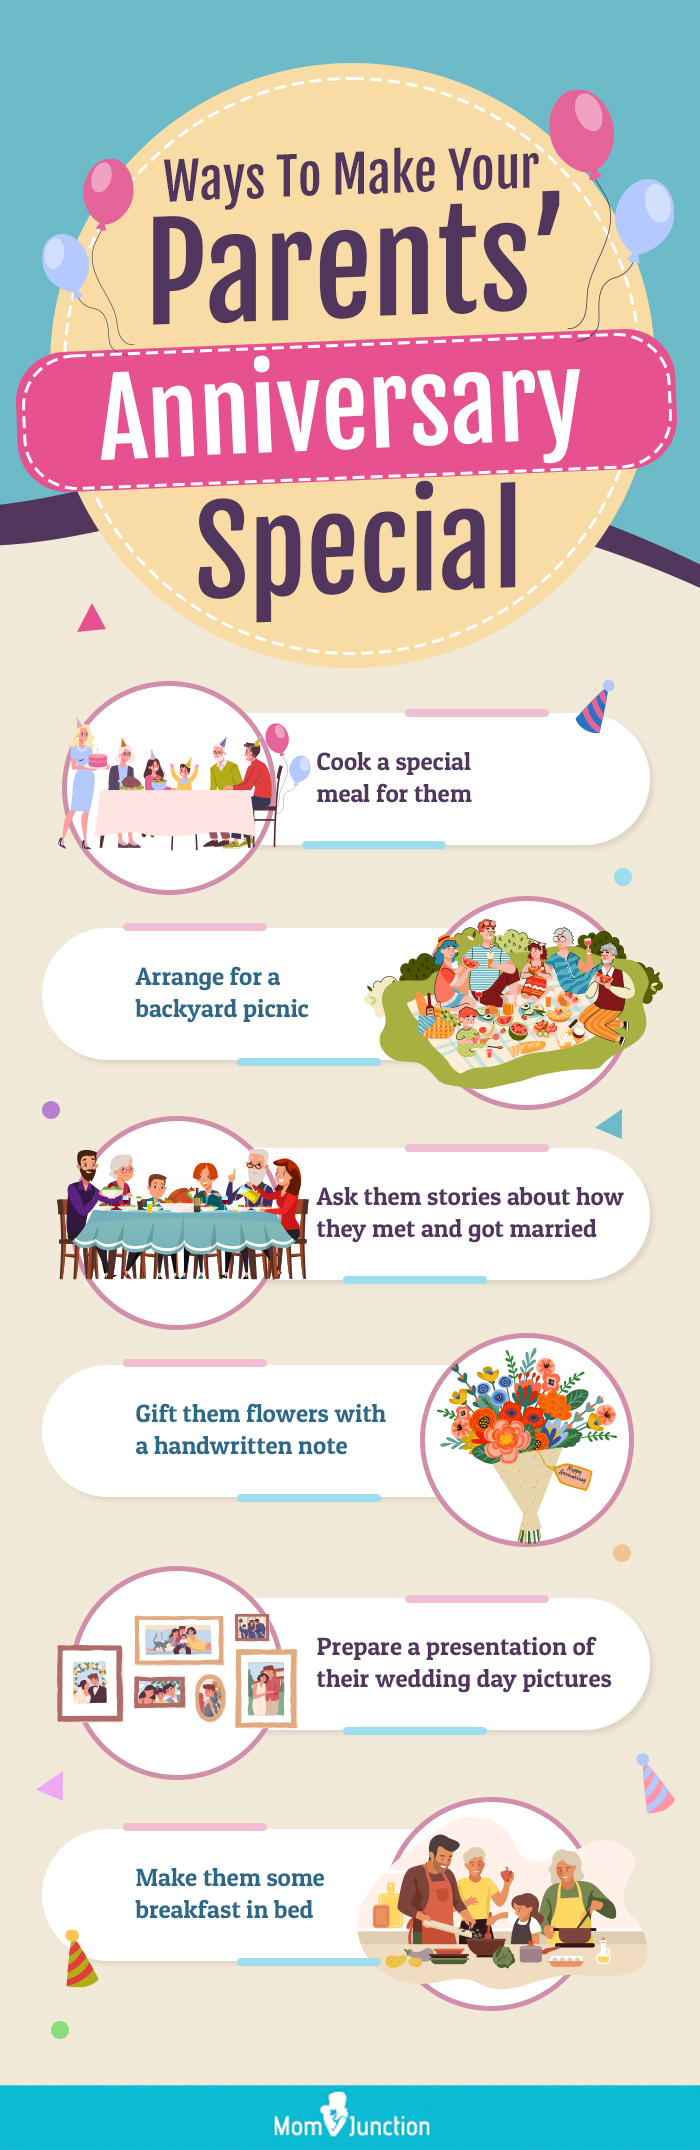 6 Cool Ways to Add Magic to Your Parents' Anniversary Party | by Roger Igo  | Medium